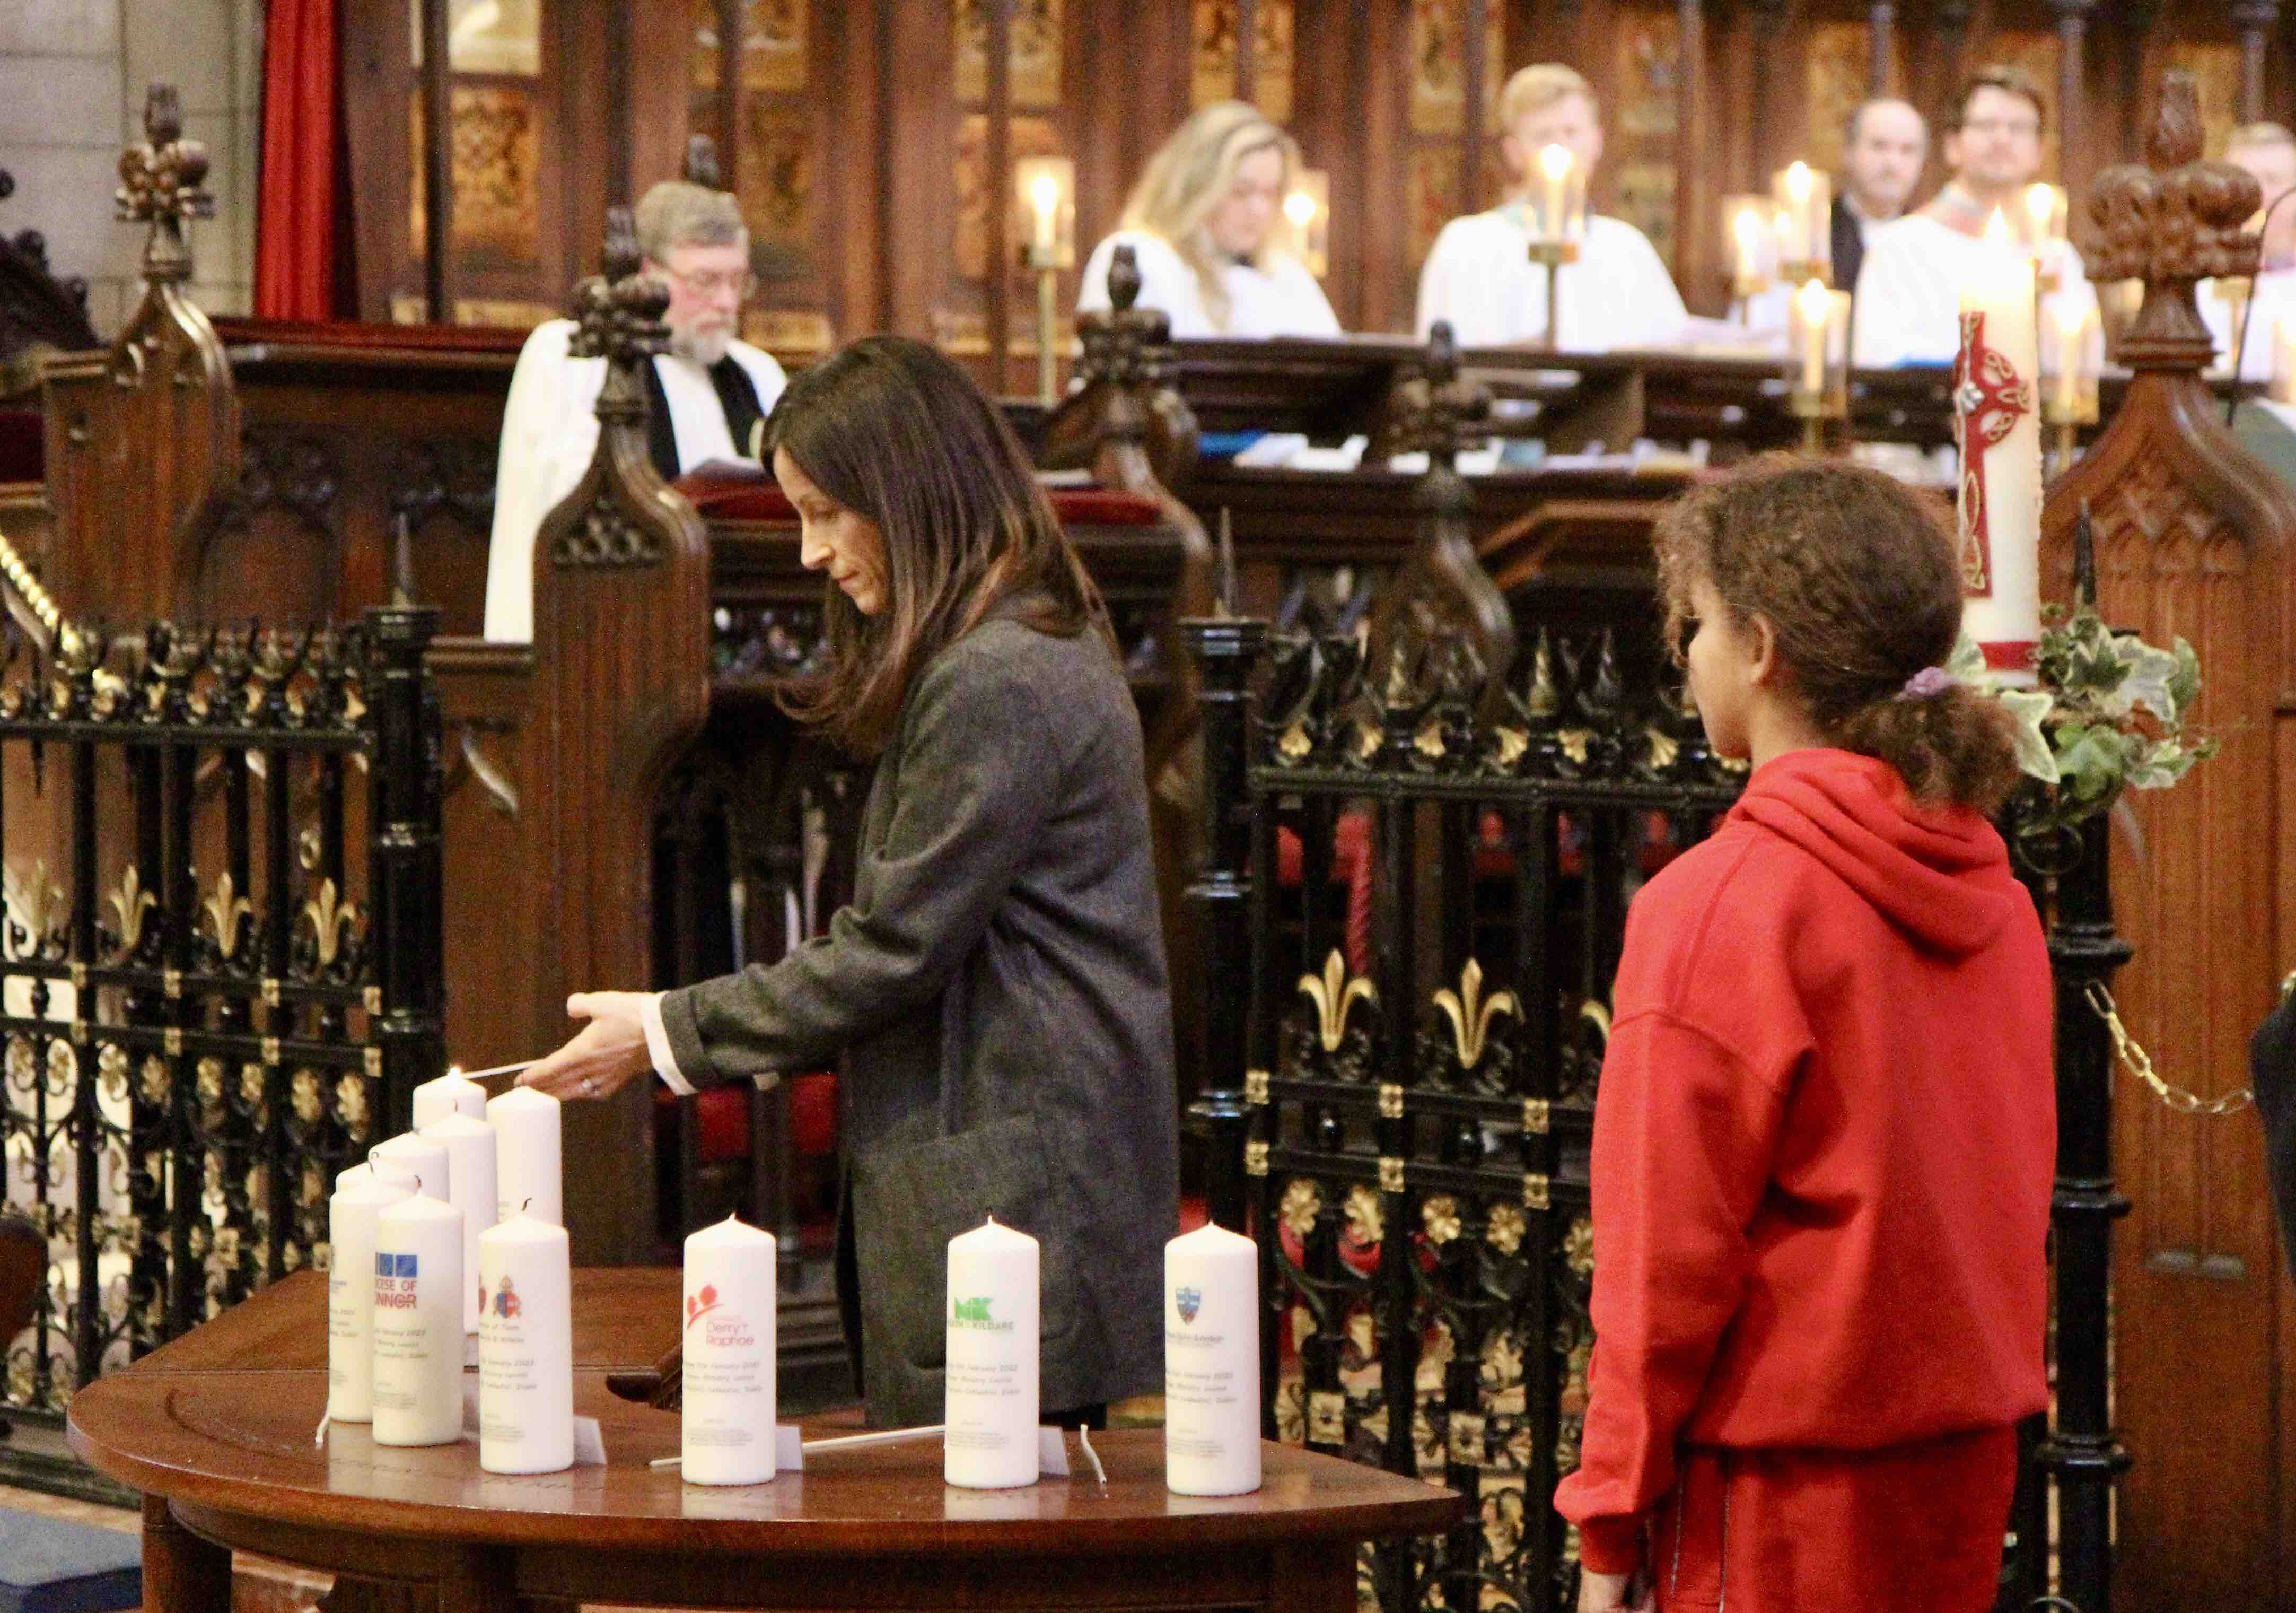 11 candles were lit at the start of the service - one for each diocese.